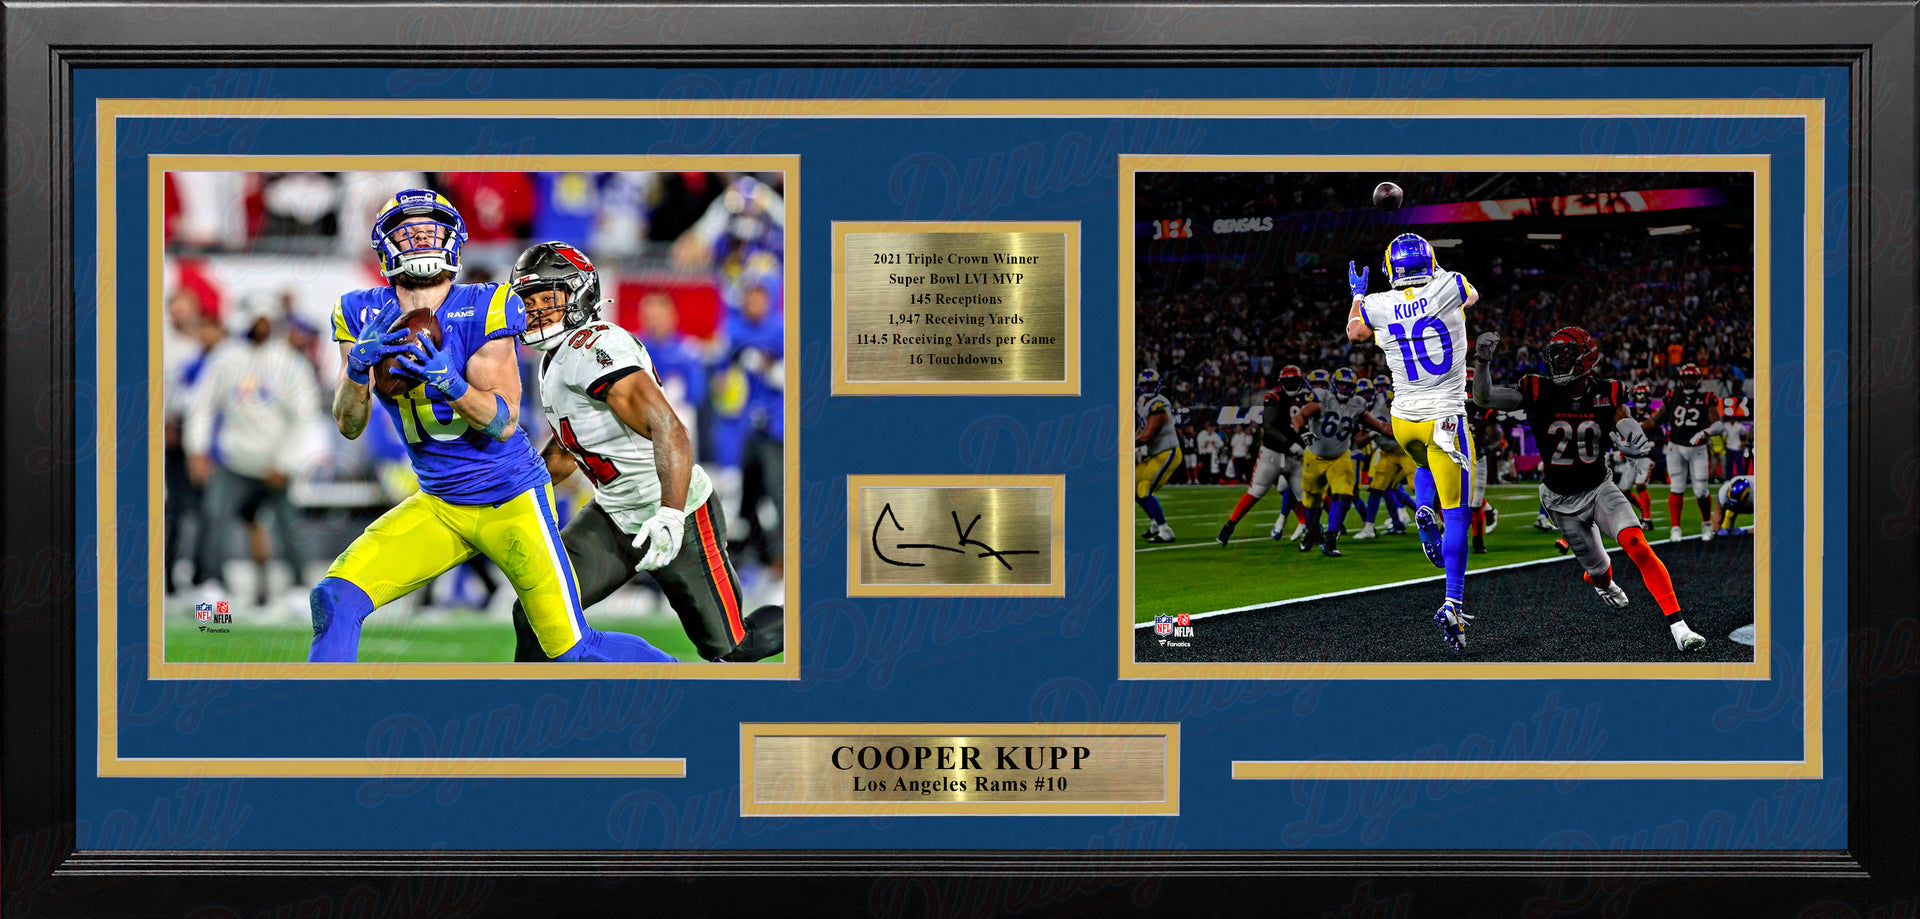 Cooper Kupp LA Rams Framed 2021 Season Football Photo Collage with Stats & Engraved Signature - Dynasty Sports & Framing 